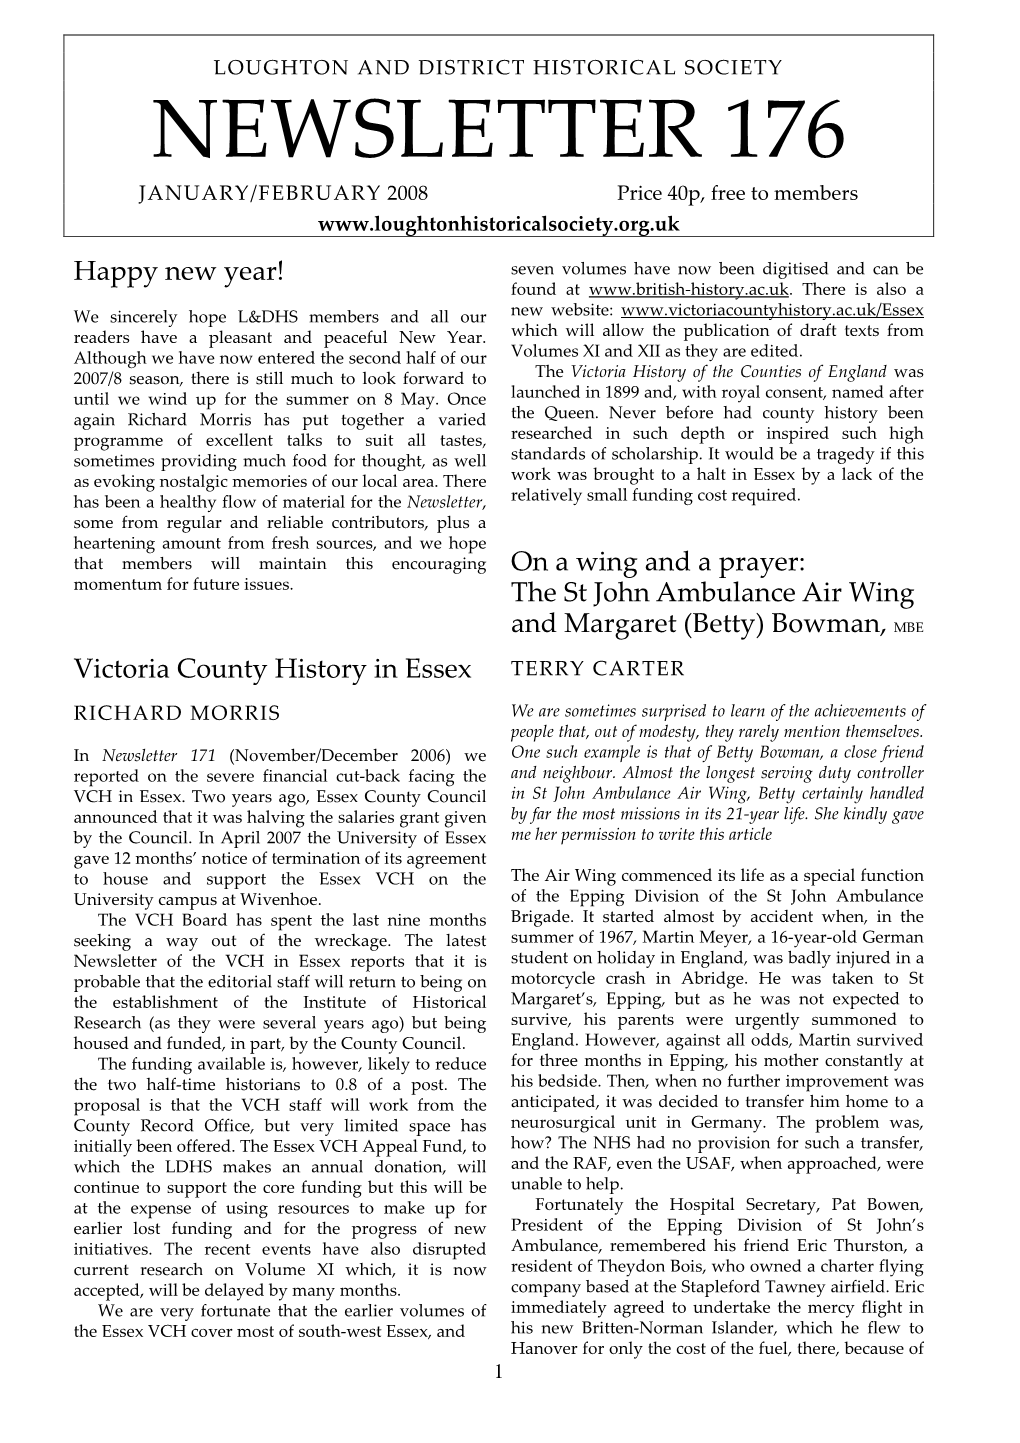 NEWSLETTER 176 JANUARY/FEBRUARY 2008 Price 40P, Free to Members